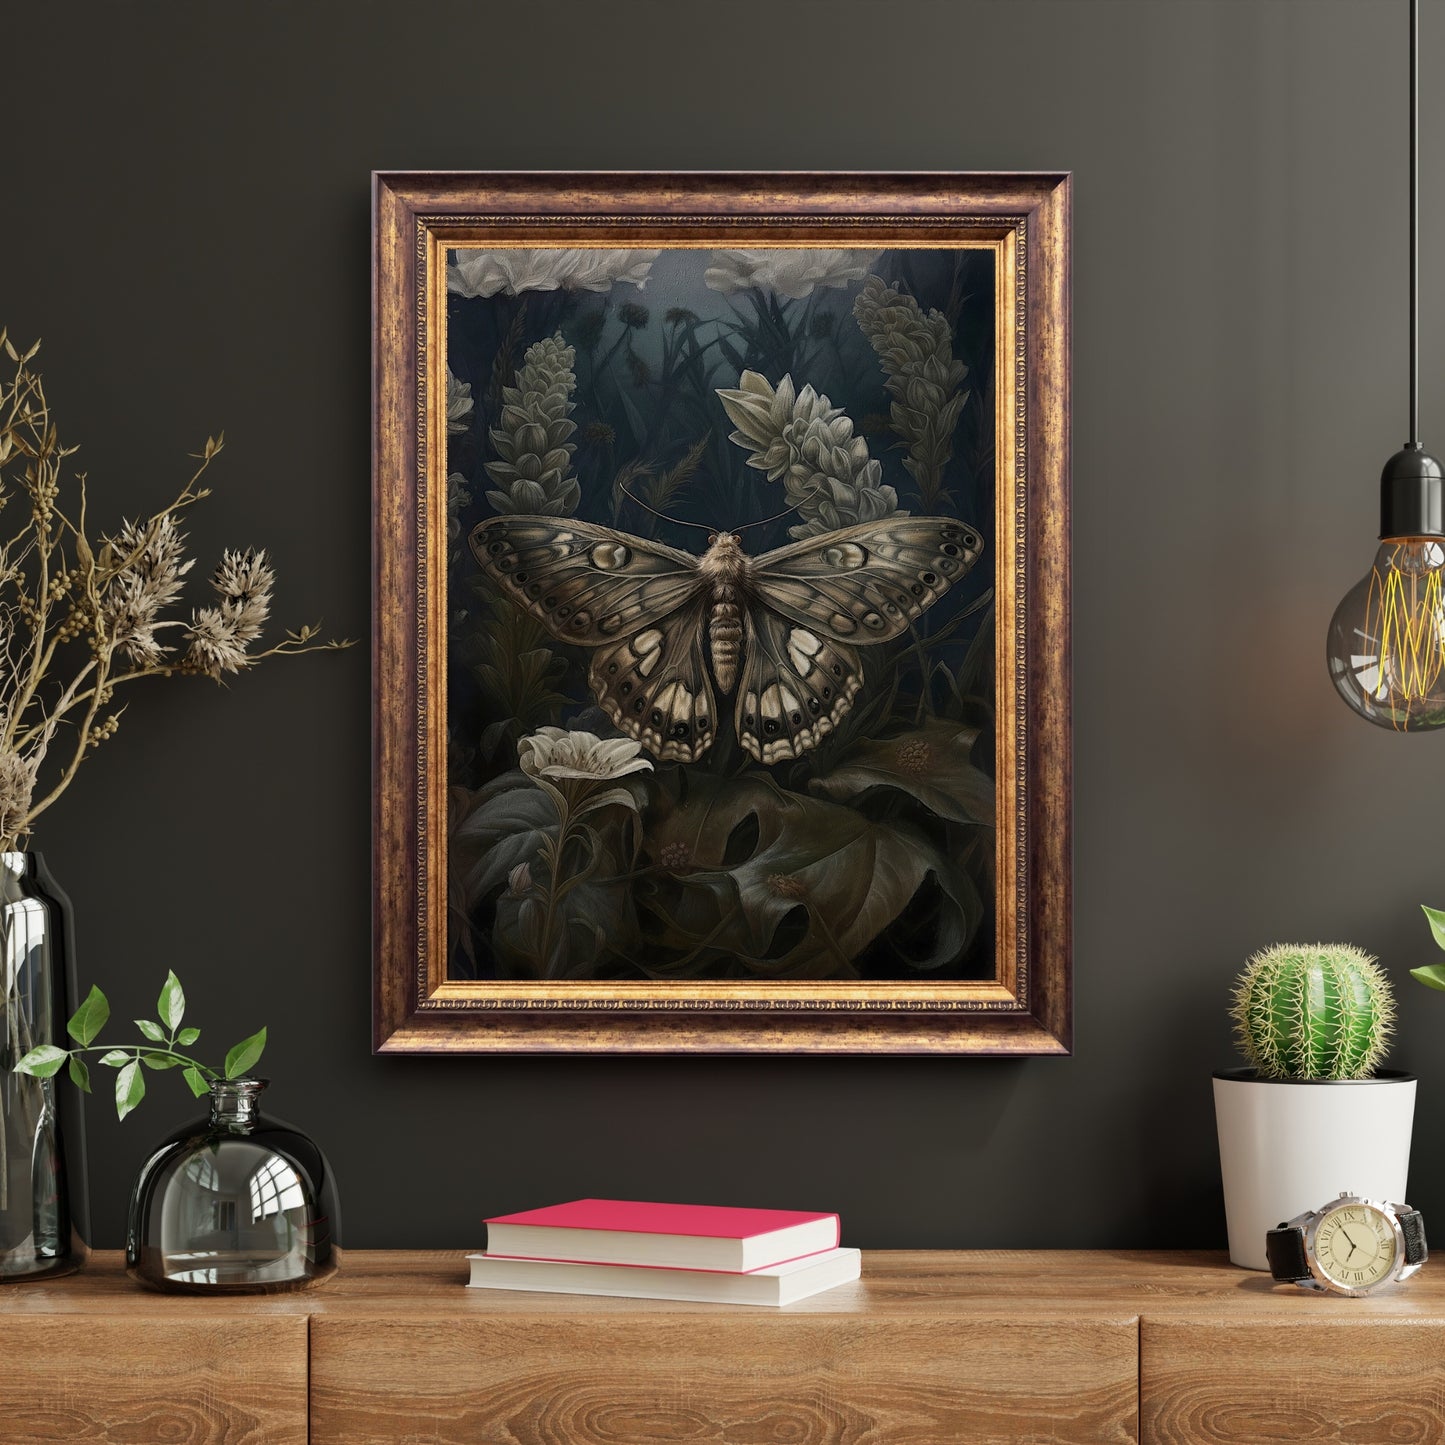 Vintage Moth Painting Wall Art Dark Academia Witchy Gothic Botanical Decor Dark Cottagecore Goblincore Goth Home Decor Paper Poster Prints